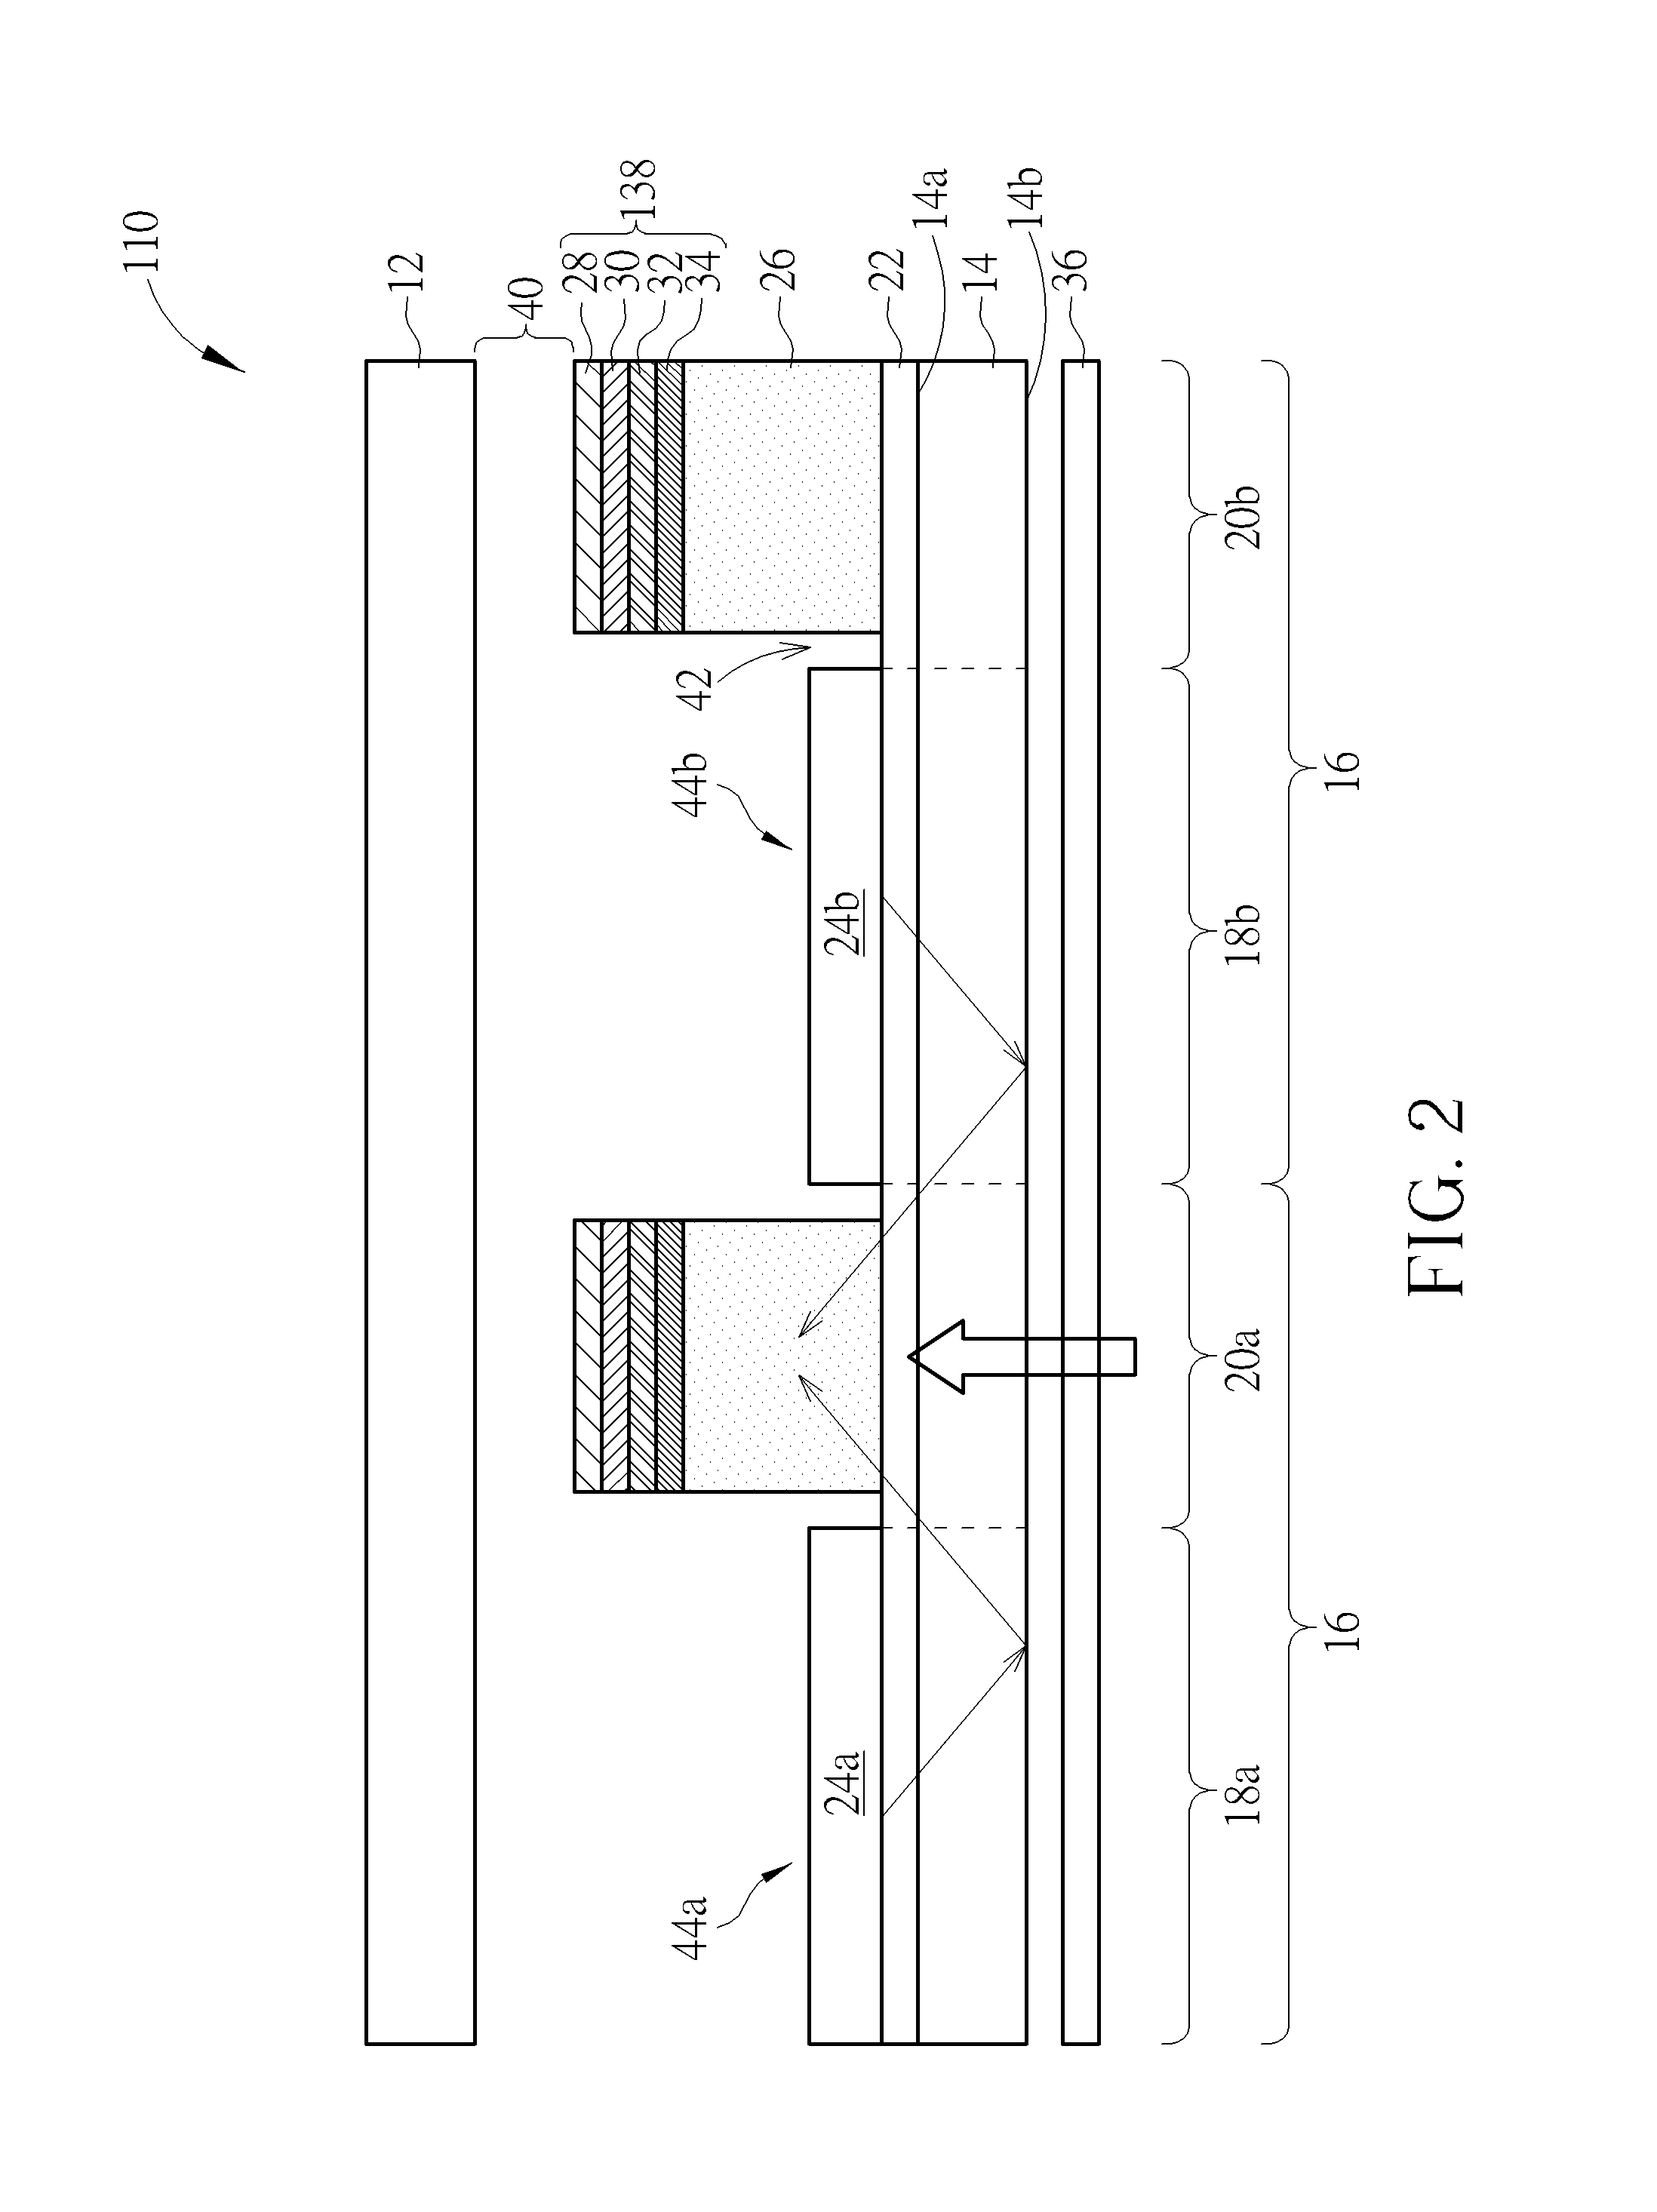 Organic light-emitting display with solar cell